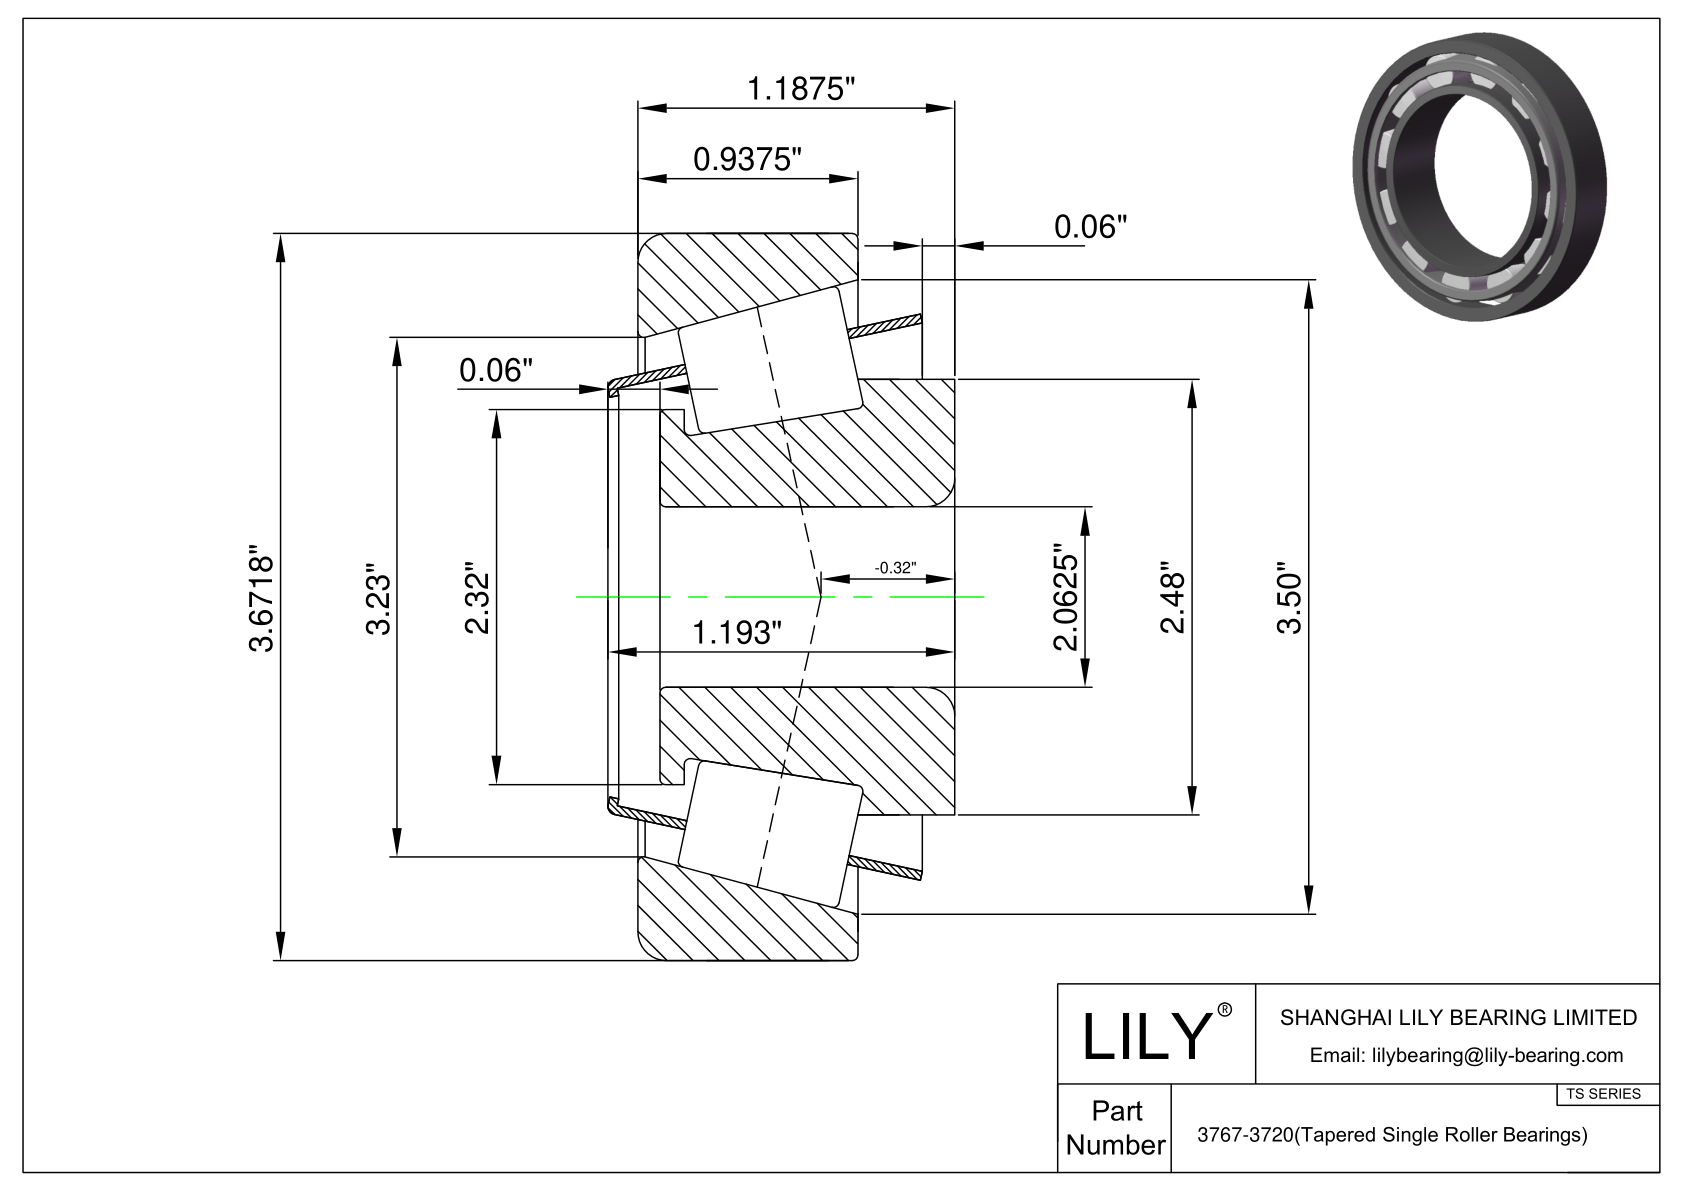 3767-3720 TS (Tapered Single Roller Bearings) (Imperial) cad drawing